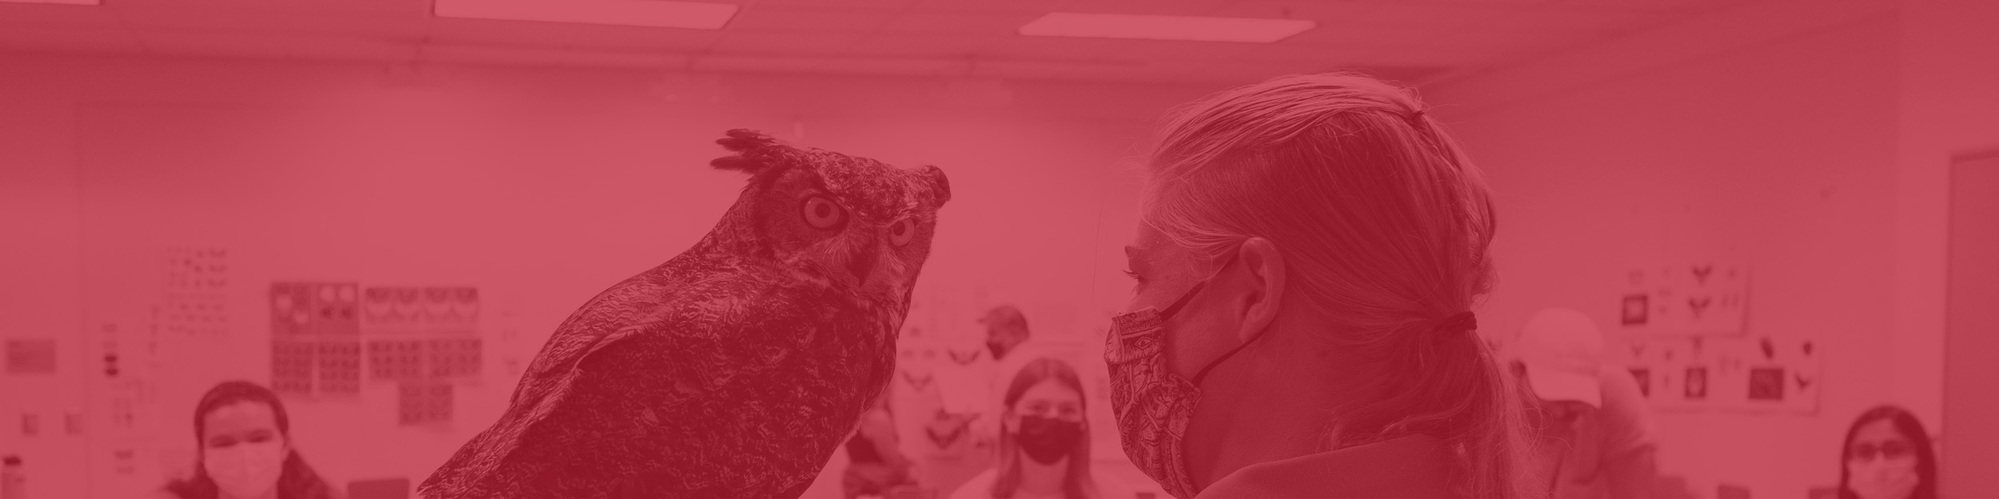 Zoo keeper holding owl in classroom